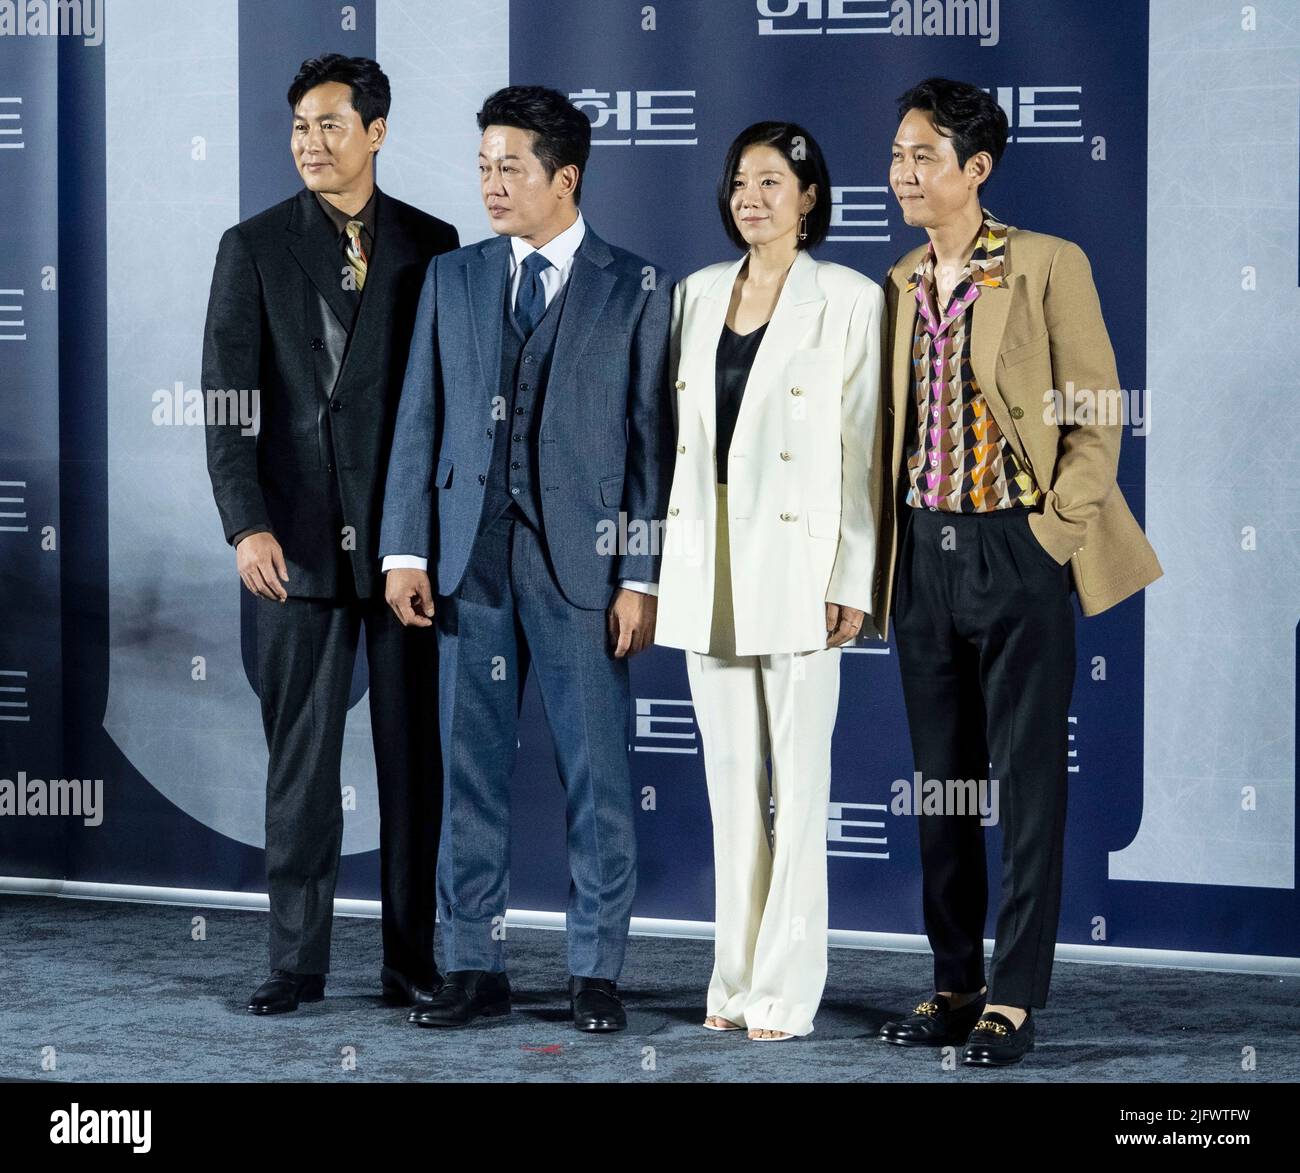 Seoul, South Korea. 5th July, 2022. (L to R) South Korean actors Jung Woo-sung, Heo Sung-tae, actress Jeon Hye-jin, actor and director Lee Jung-jae, pose for photos during a press conference to promote their latest movie 'Hunt' in Seoul, South Korea on July 5, 2022. The movie is to be released in the country on Aug 10. (Photo by: Lee Young-ho/Sipa USA) Credit: Sipa USA/Alamy Live News Stock Photo